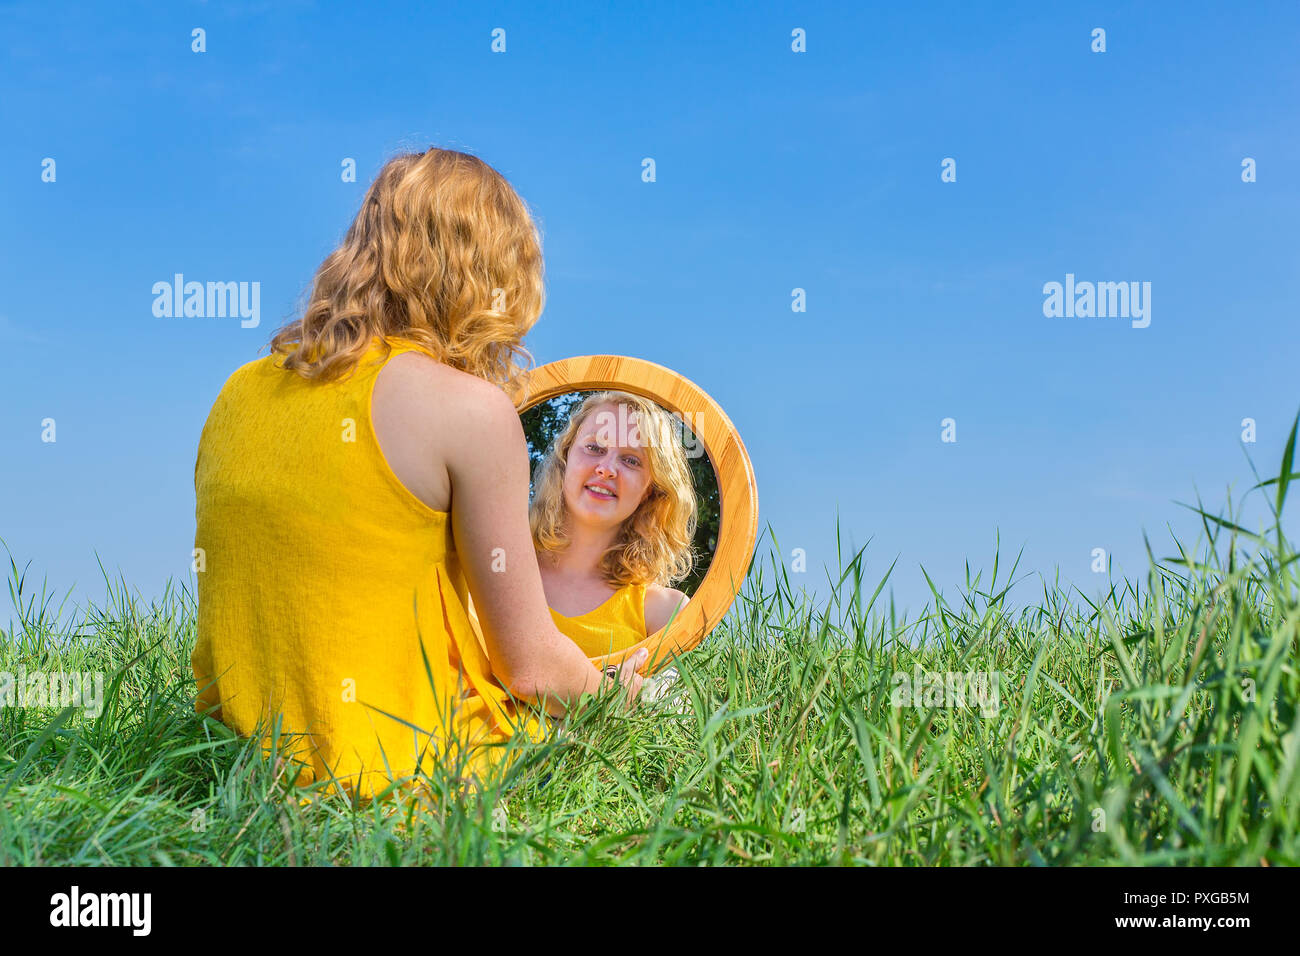 Red-haired woman sits looking at her mirror image outside Stock Photo